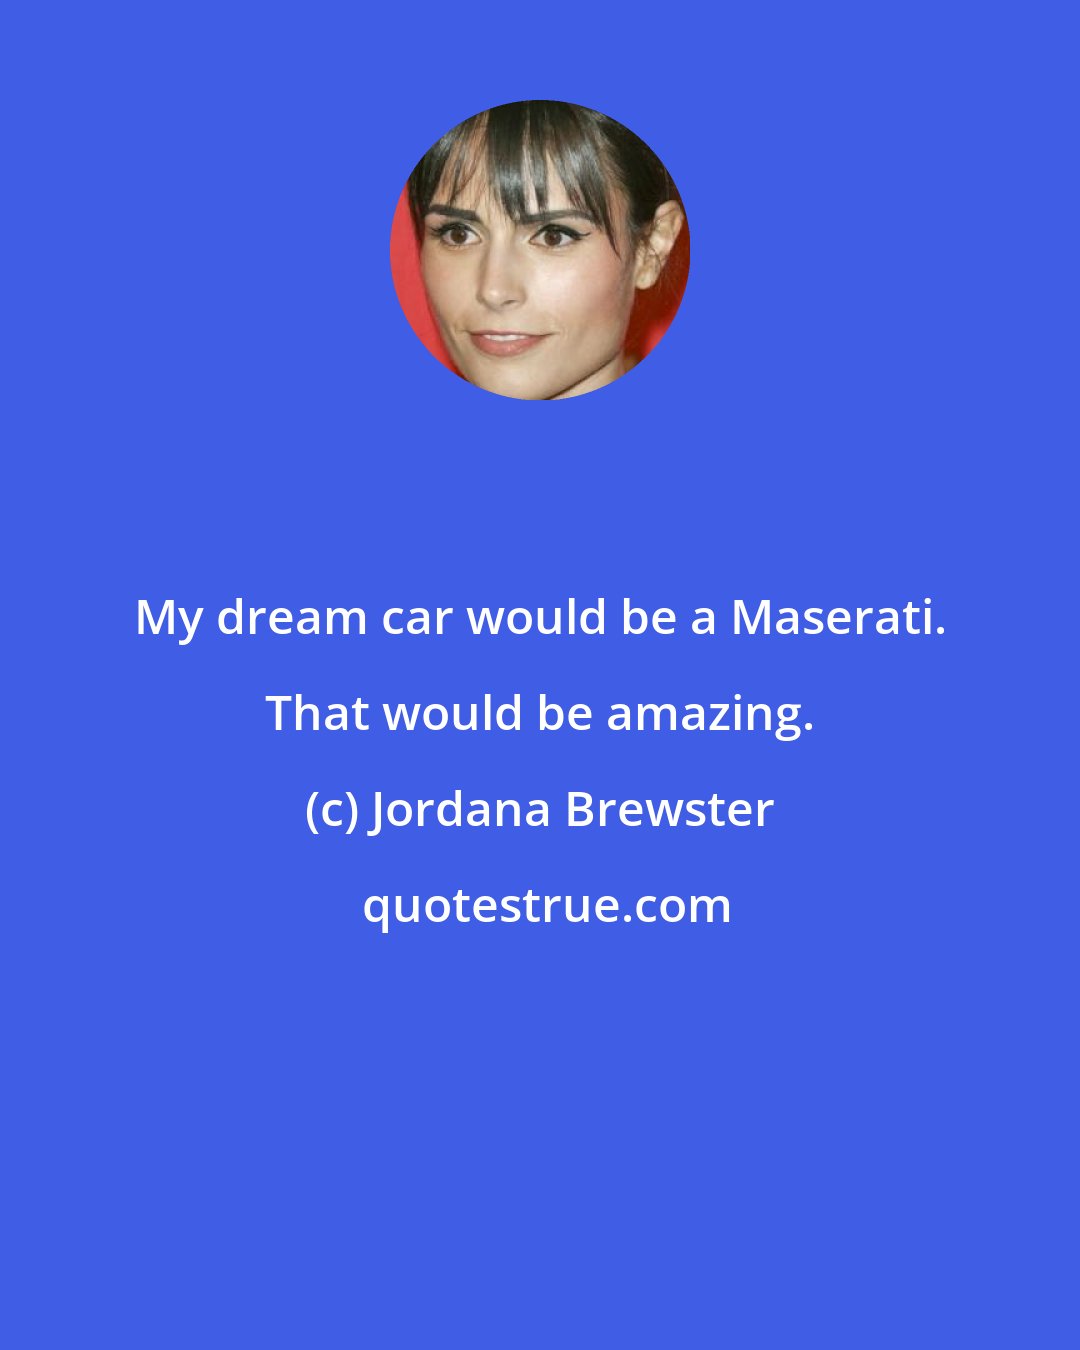 Jordana Brewster: My dream car would be a Maserati. That would be amazing.